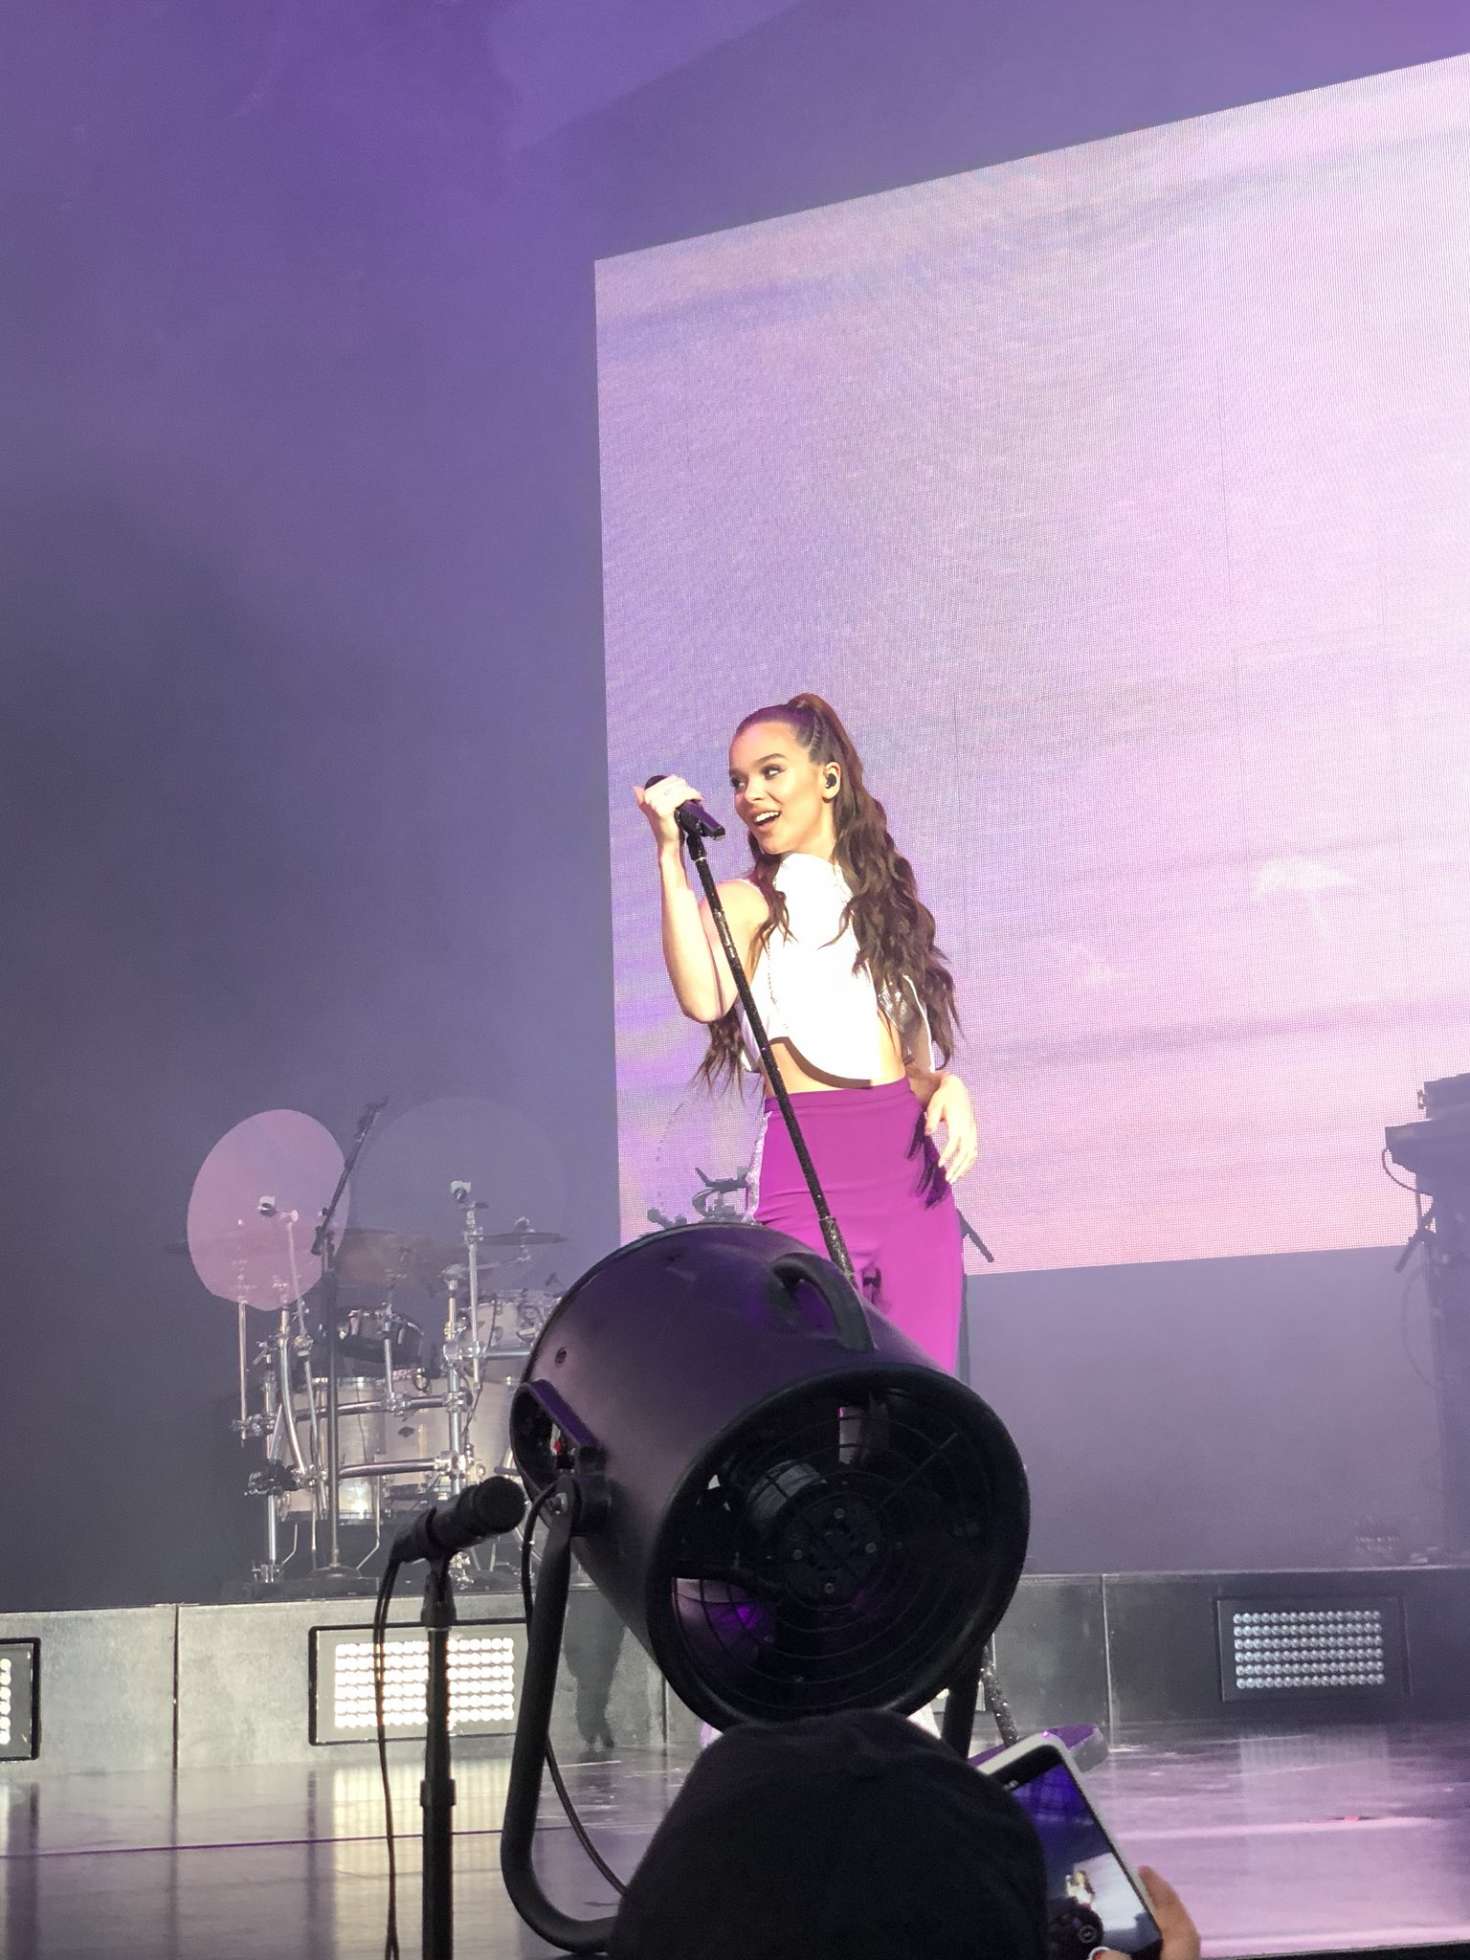 Hailee Steinfeld â€“ The Voicenotes Tour in Boston